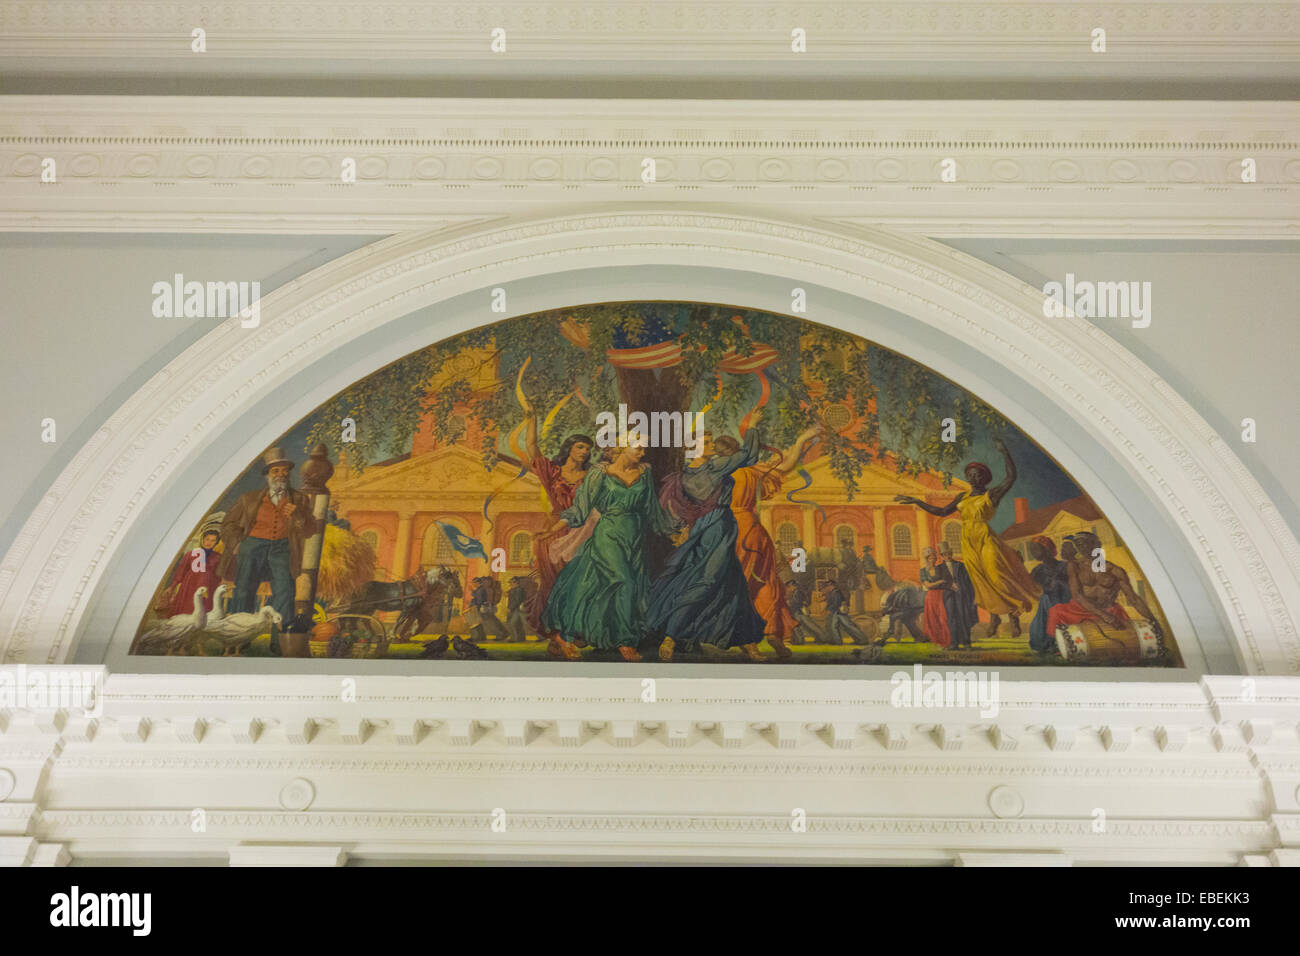 New Haven free public library murals in CT Stock Photo